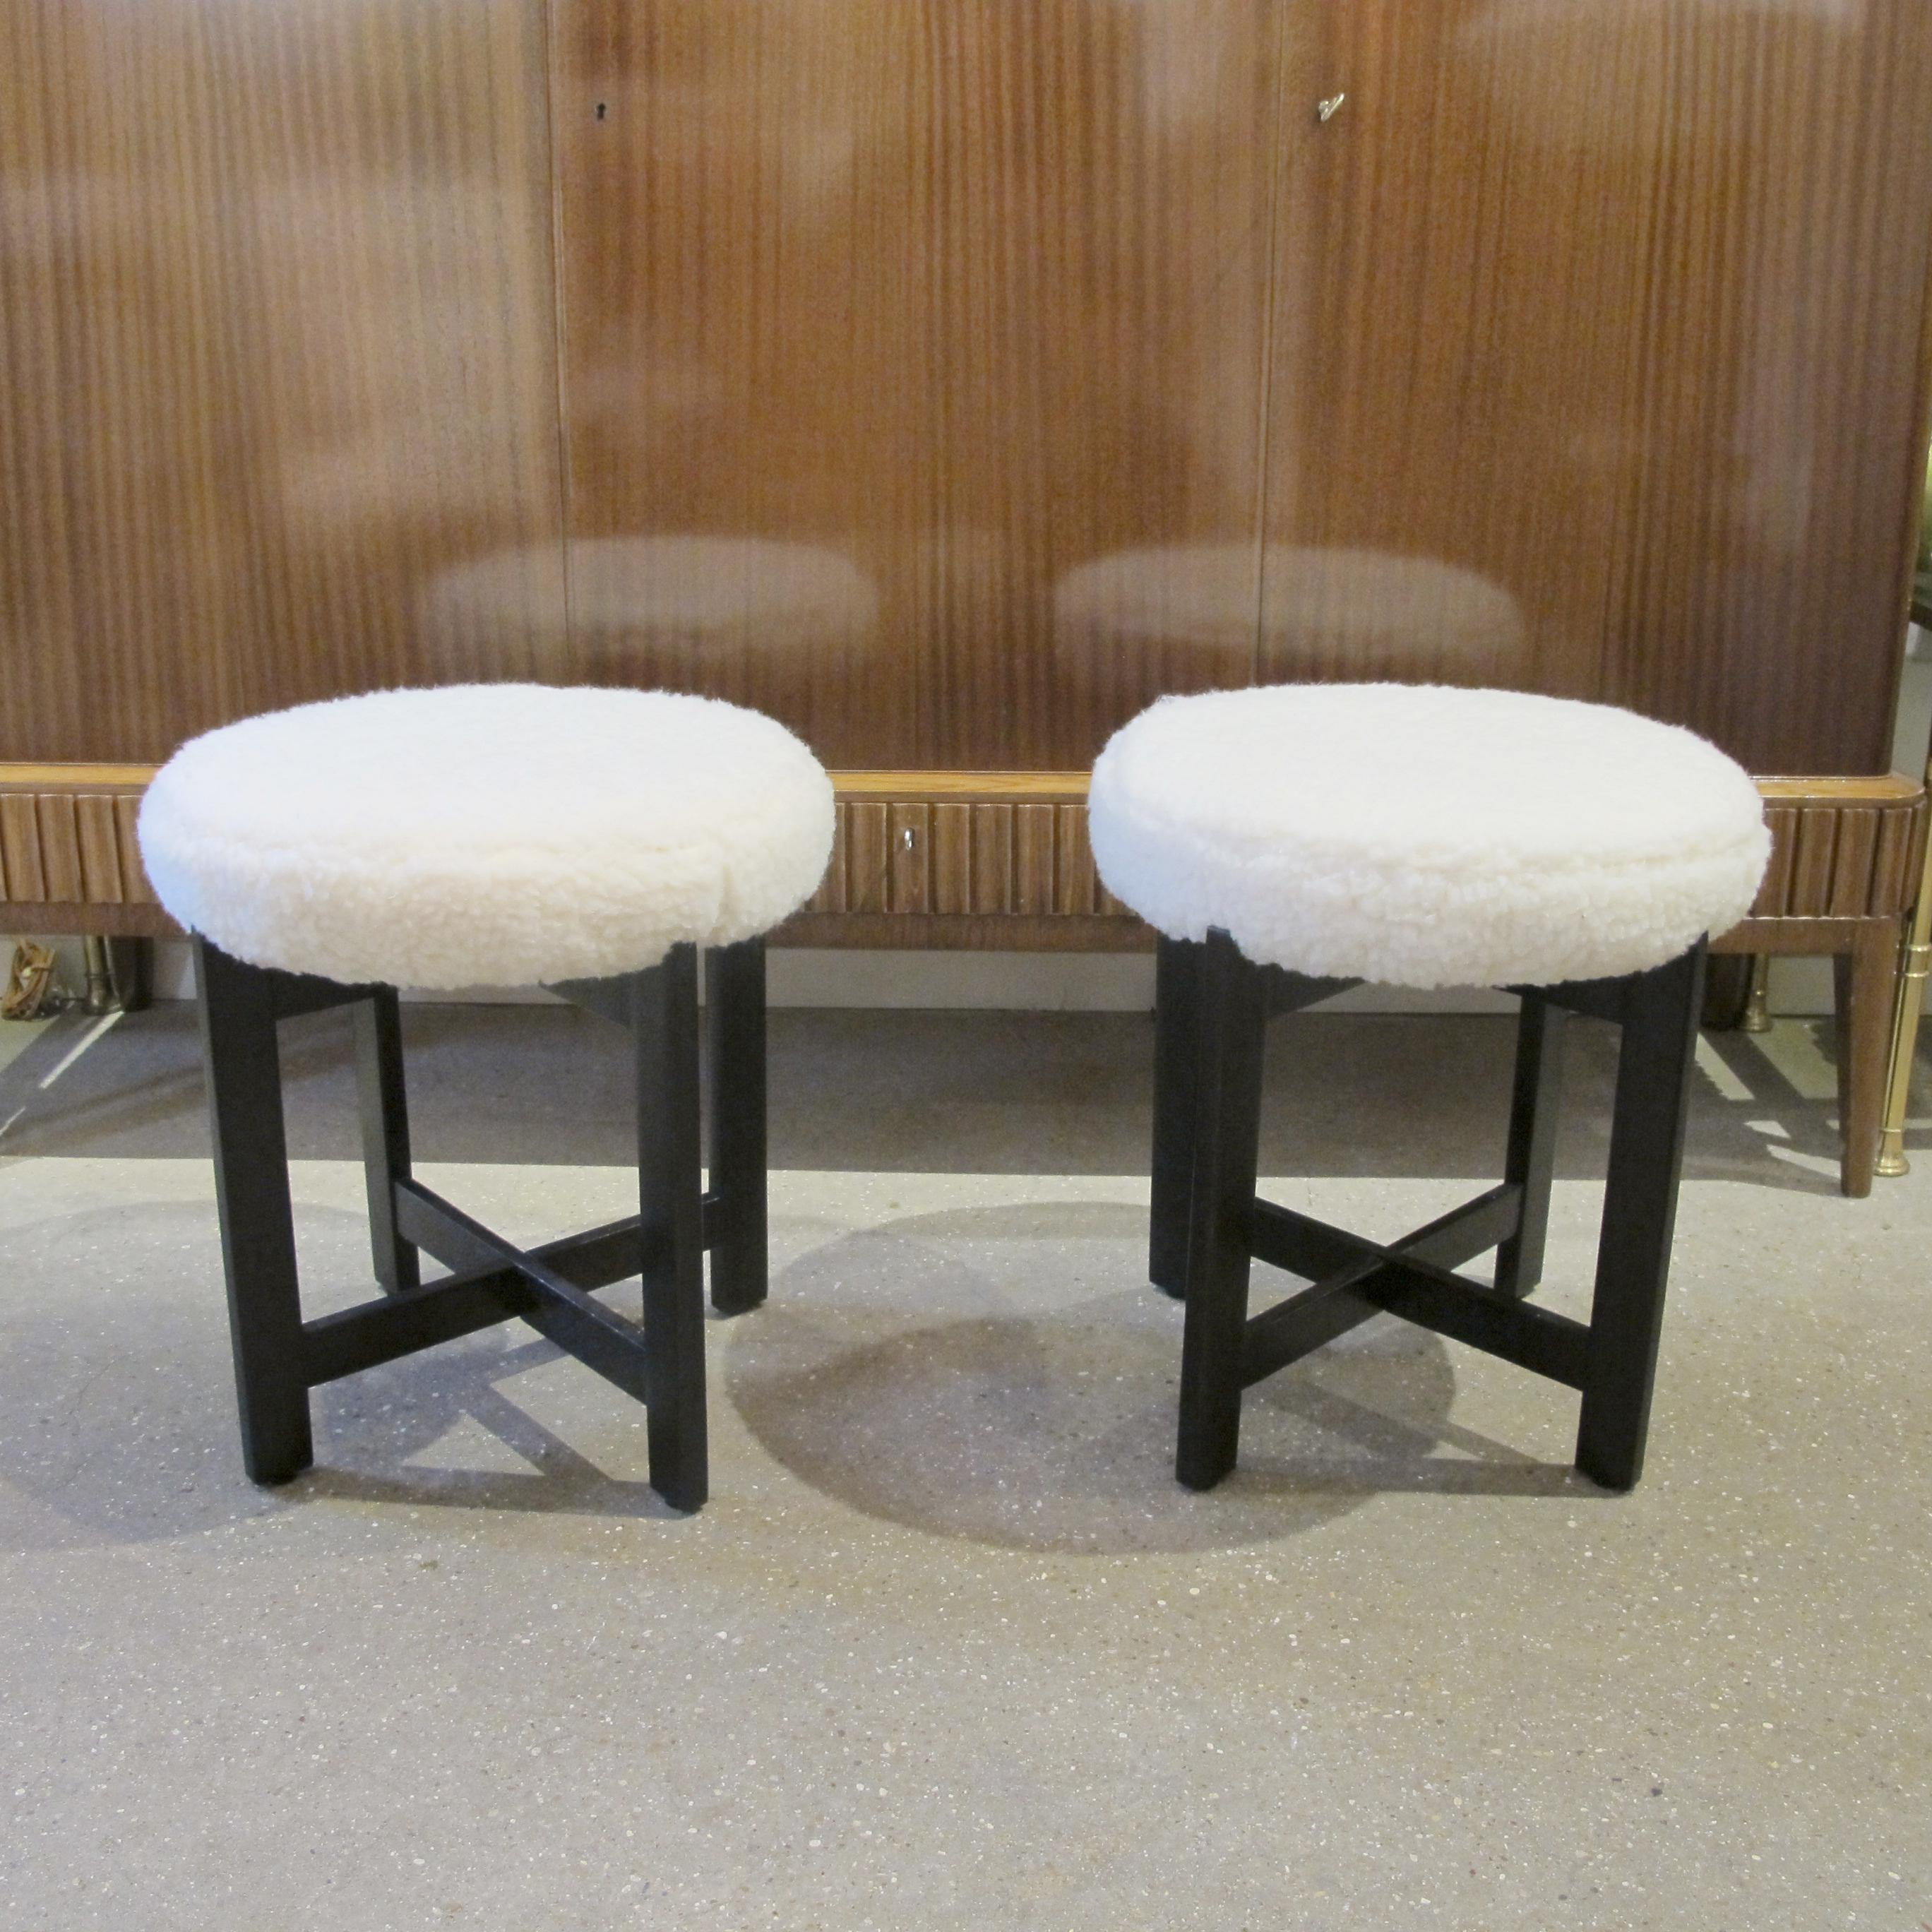 1960s Pair of Teak Frame Stools Newly Upholstered, Scandinavian In Good Condition For Sale In London, GB